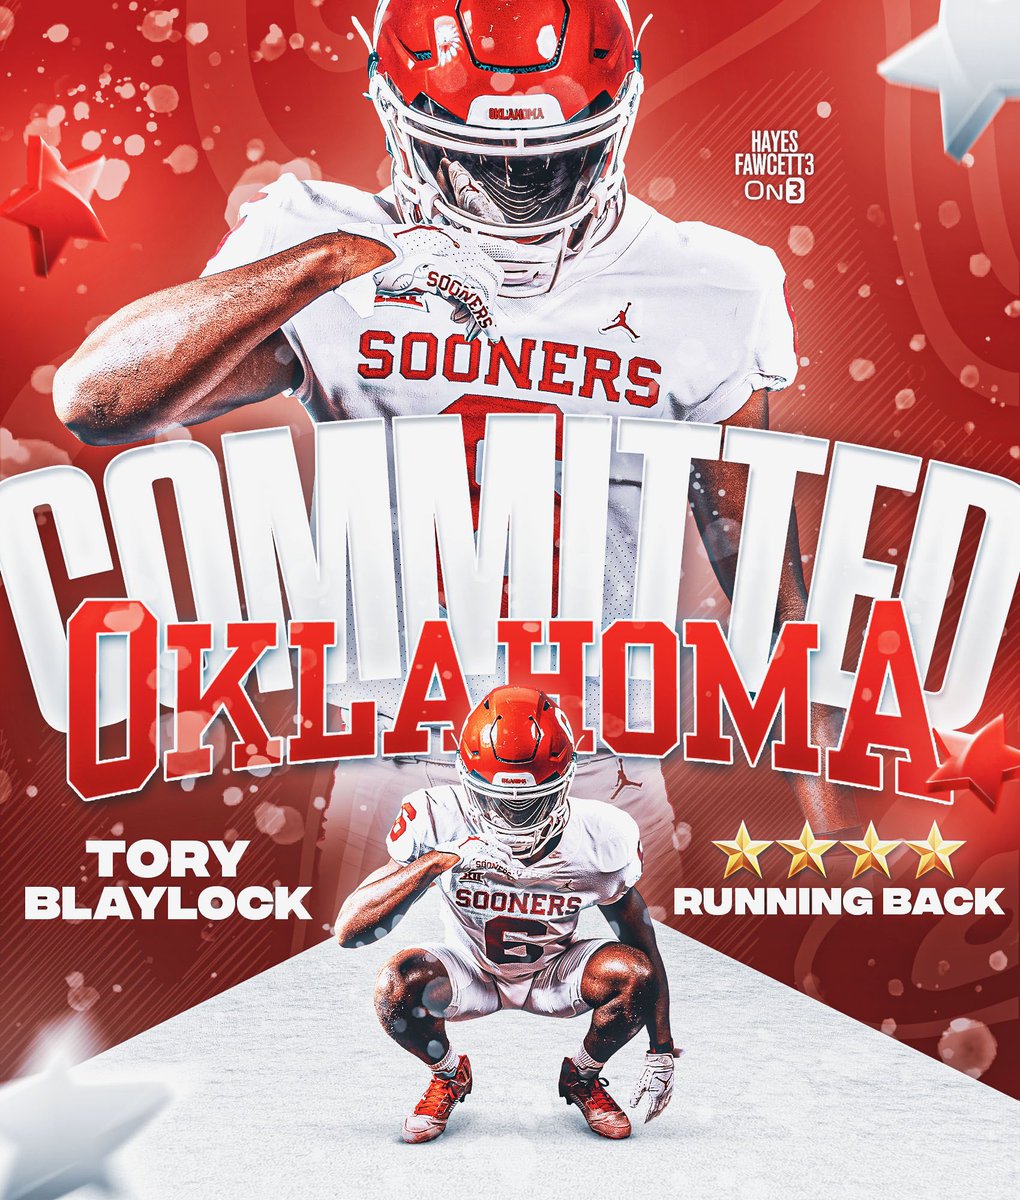 BREAKING: Four-Star RB Tory Blaylock has Committed to Oklahoma, he tells me for @on3recruits The 6’0 197 RB from Houston, TX chose the Sooners over Texas, Ohio State, & Tennessee “Sooner Nation it’s up🤝🏾 Let’s get this money!” on3.com/db/tory-blaylo…